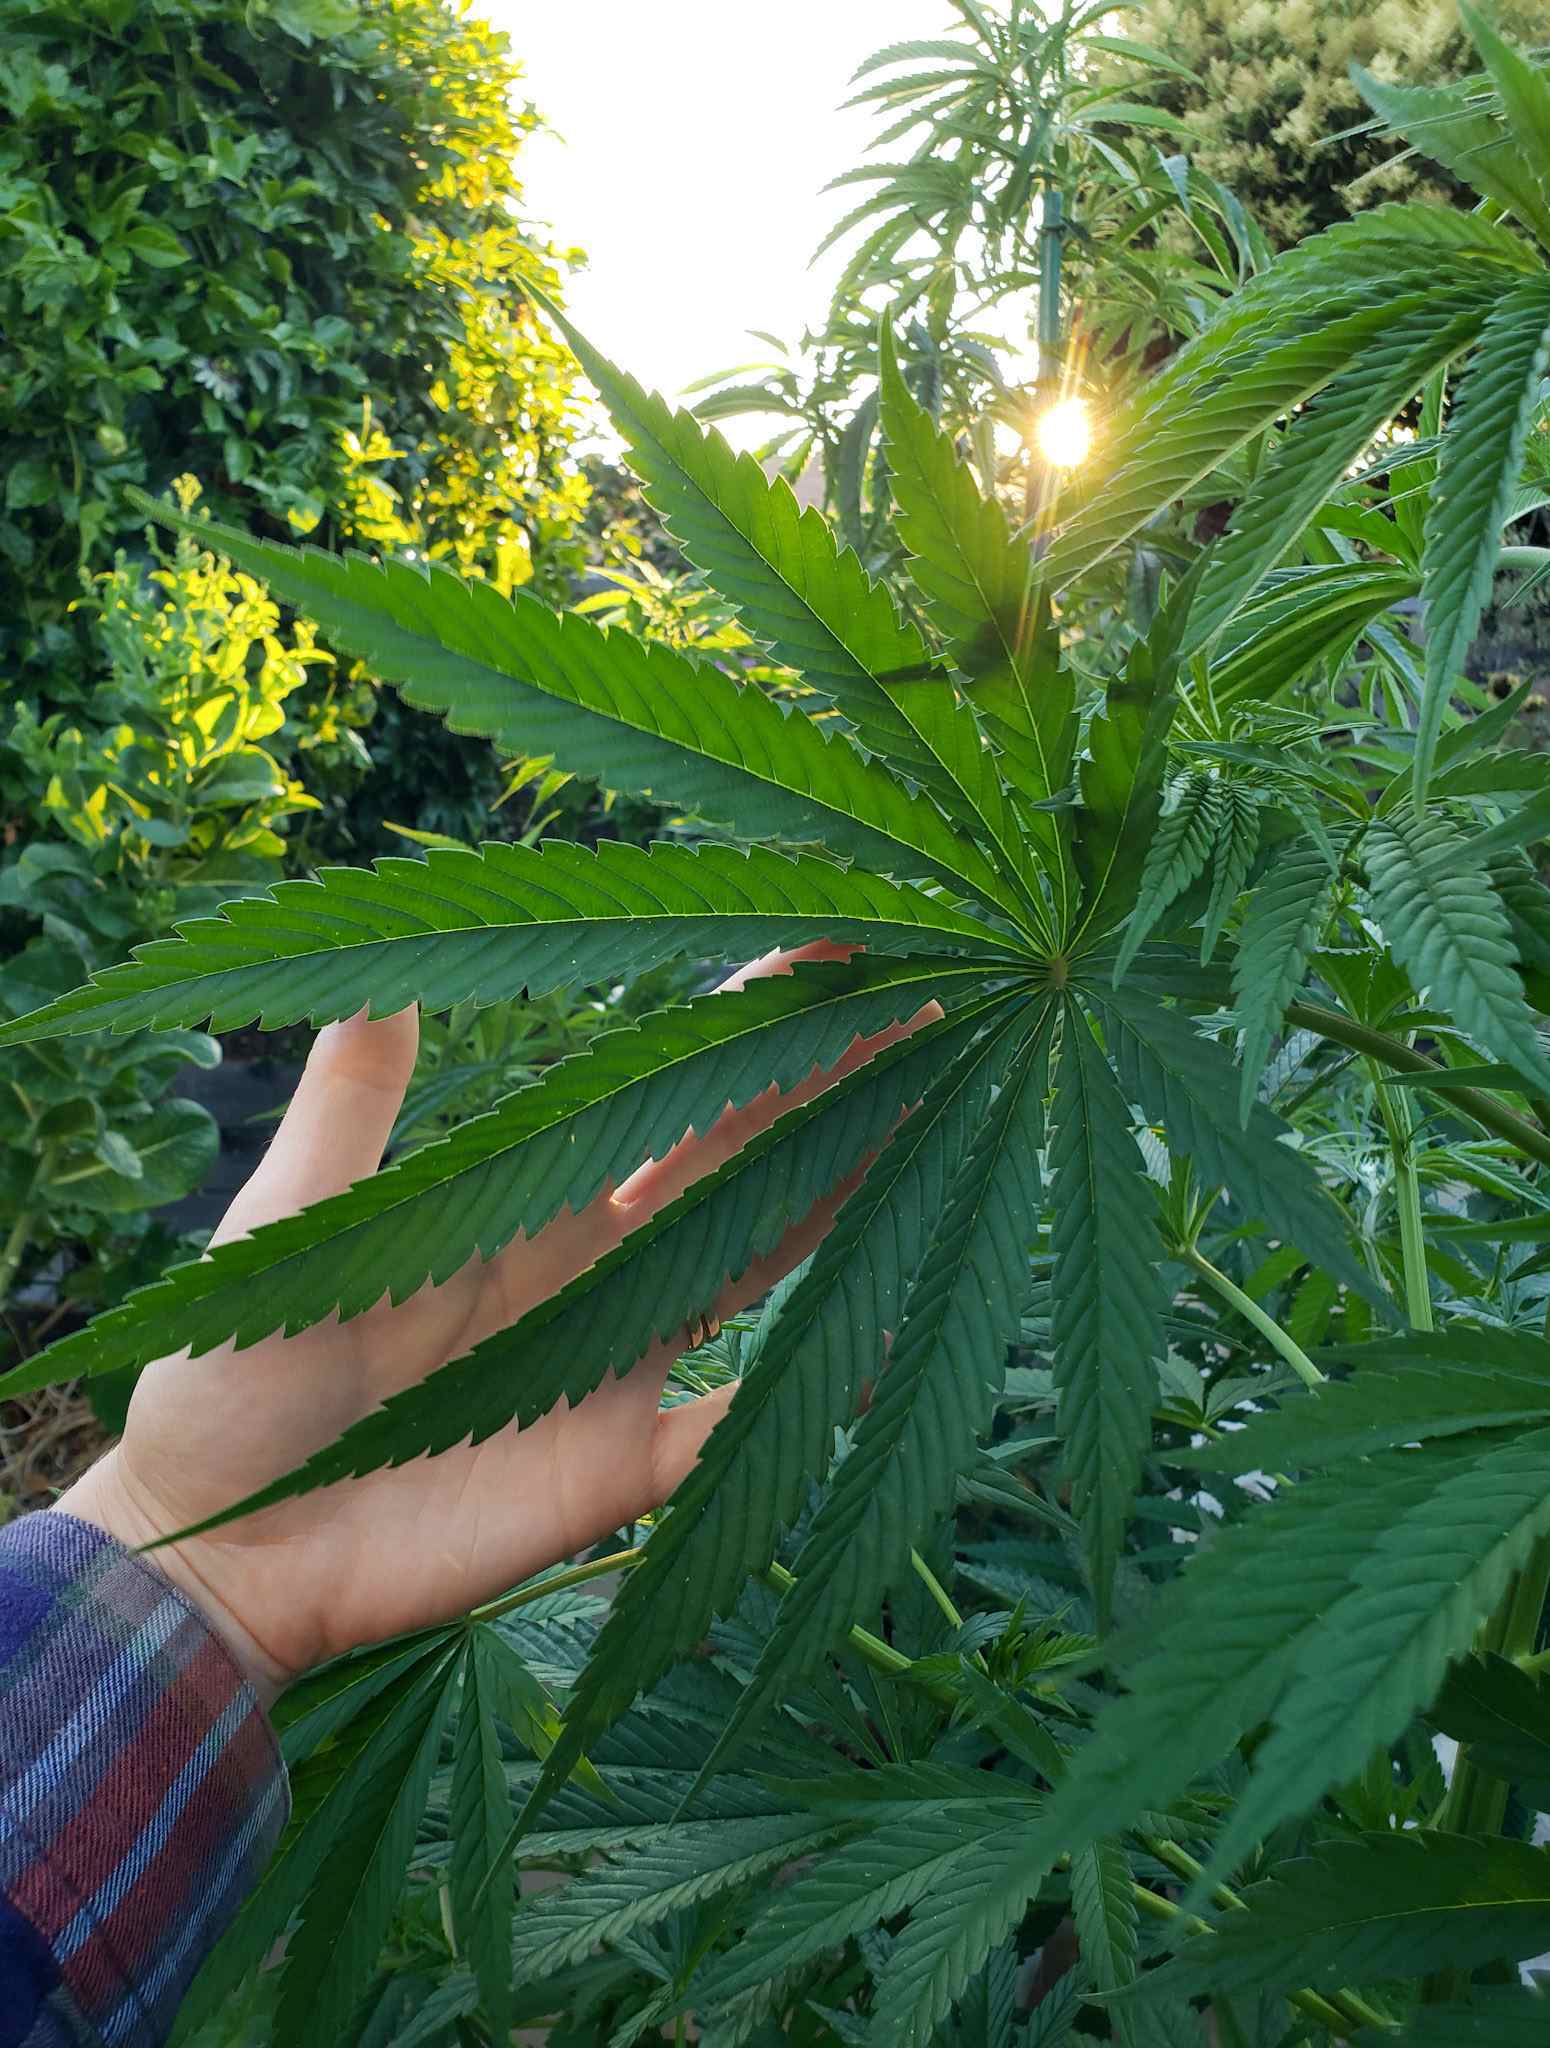 DeannaCat is holding the back of a huge cannabis fan leaf to help it pose for the image. The dark green leaf with serrated edges stands as the feature of many more leaves surrounding the one, the setting sun is filtering through the main stalk of the plant. 